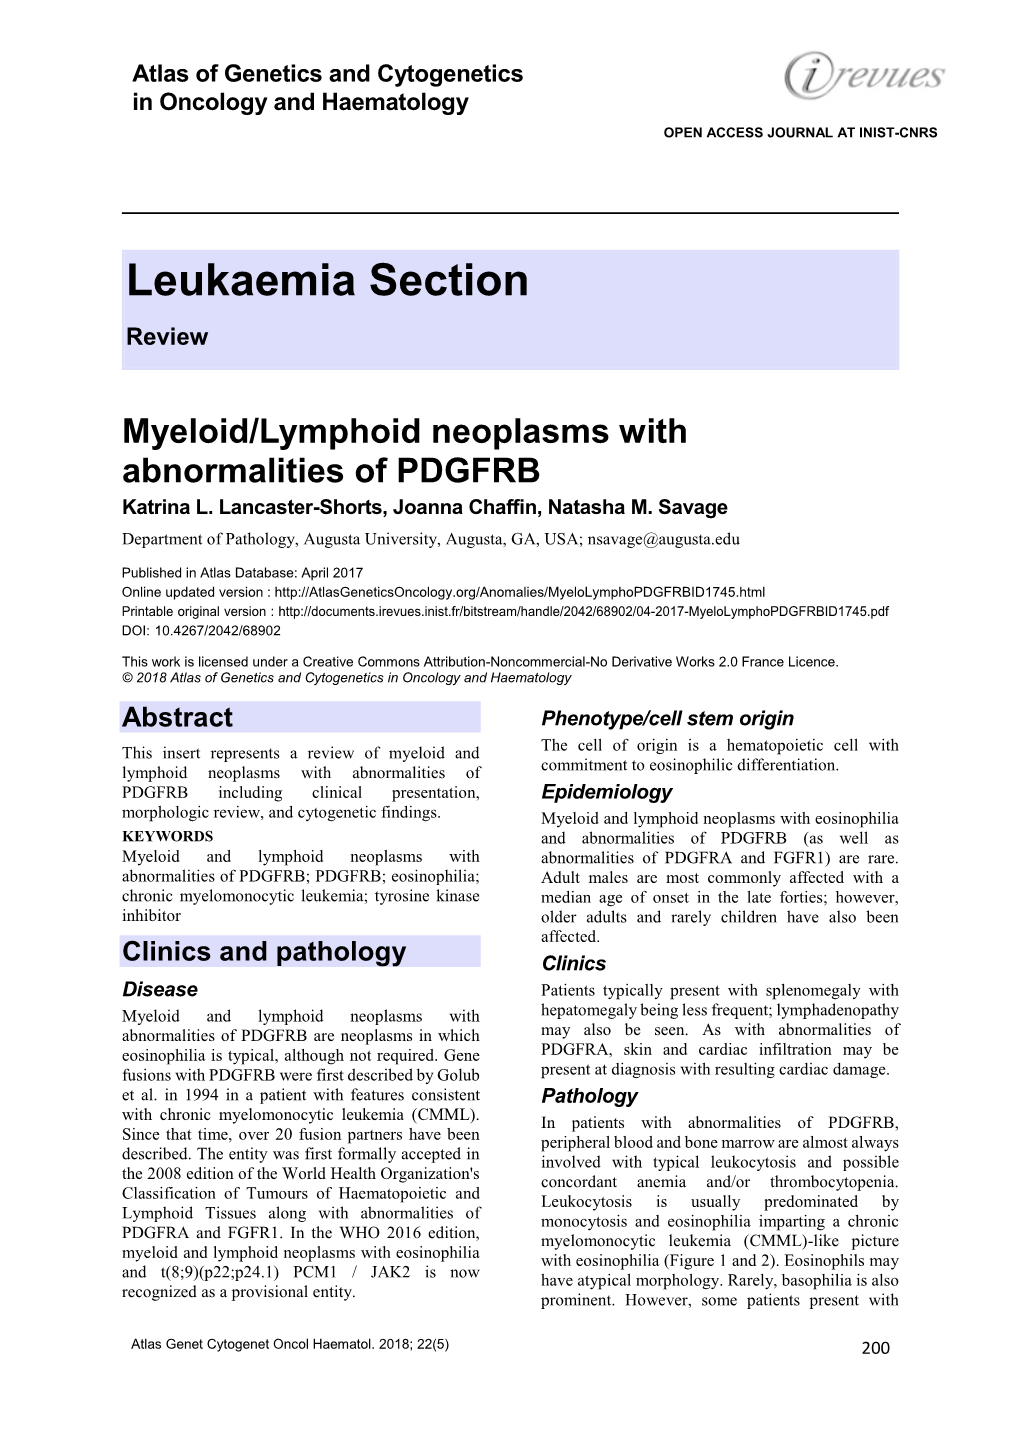 Myeloid/Lymphoid Neoplasms with Abnormalities of PDGFRB Katrina L